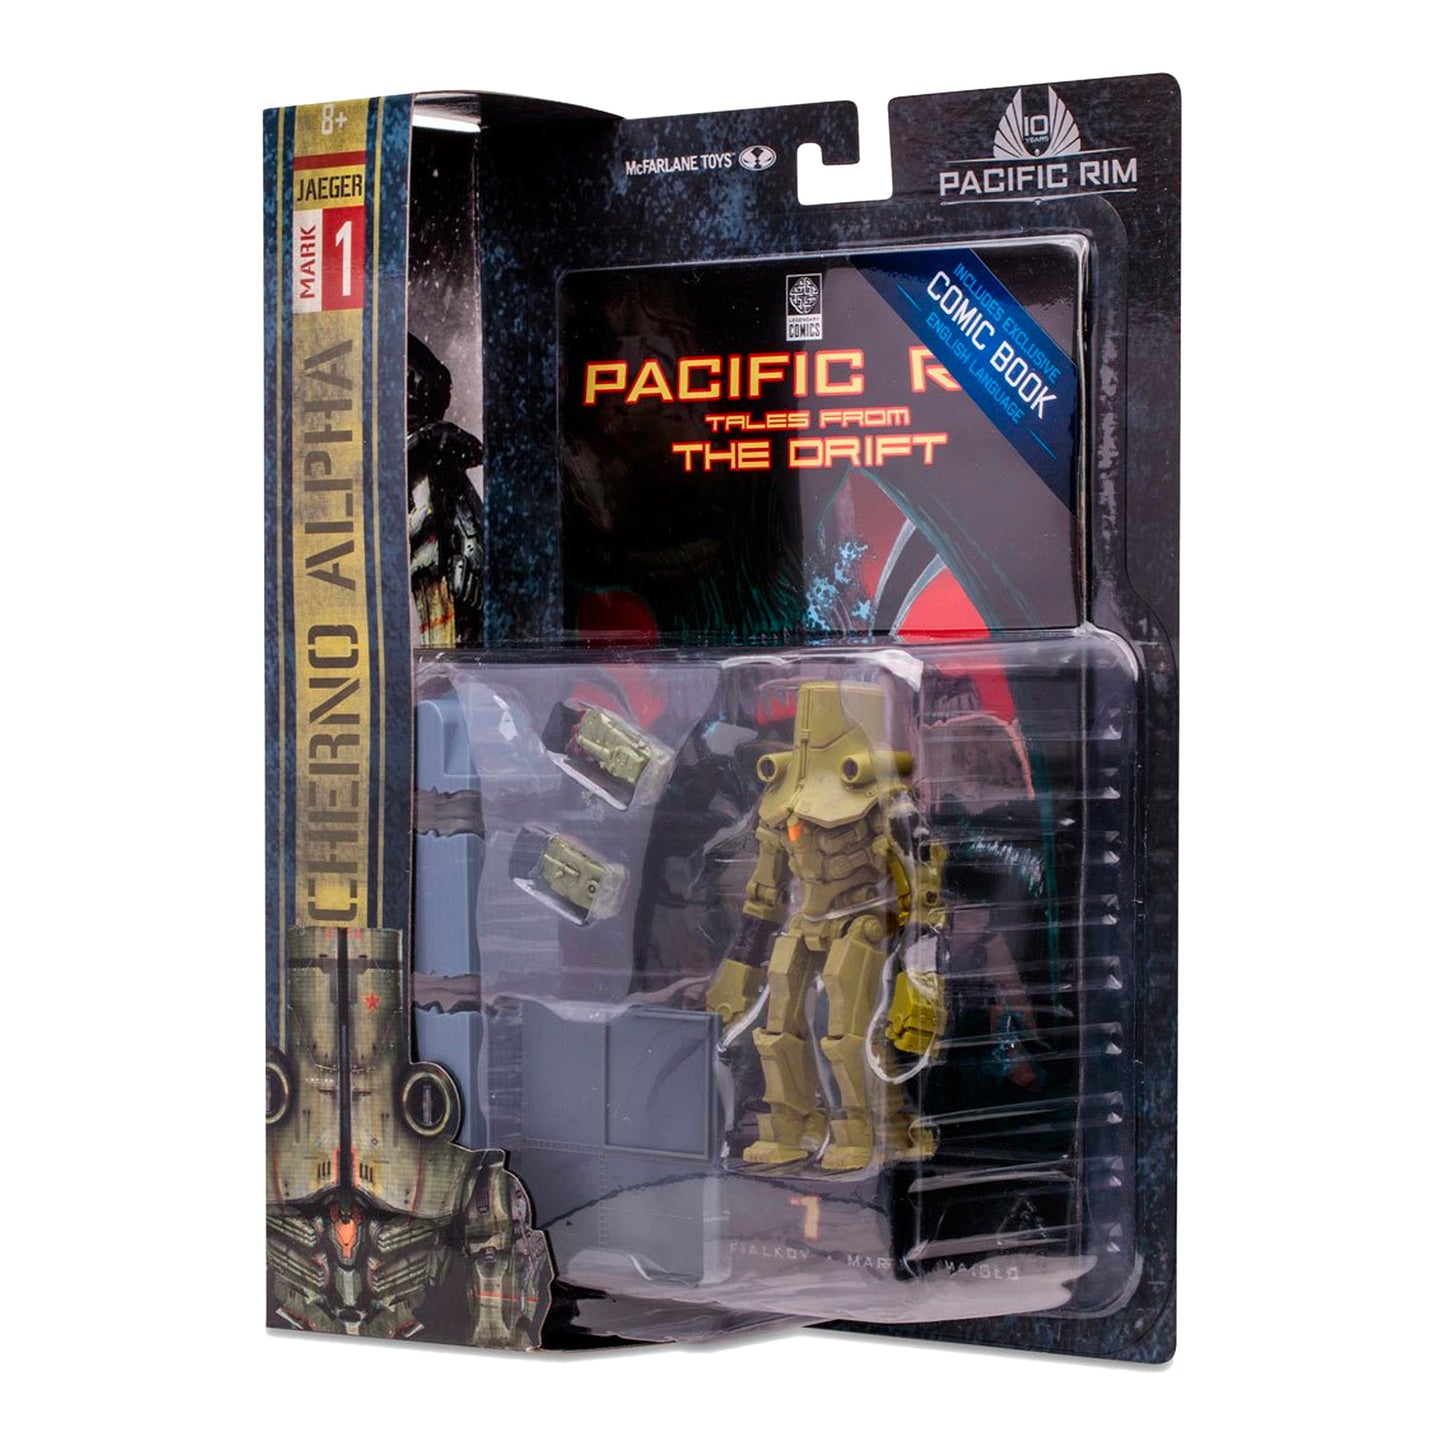 McFarlane Toys: Pacific Rim - Jaeger Wave 1 Cherno Alpha 4" Tall Action Figure with Comic Book